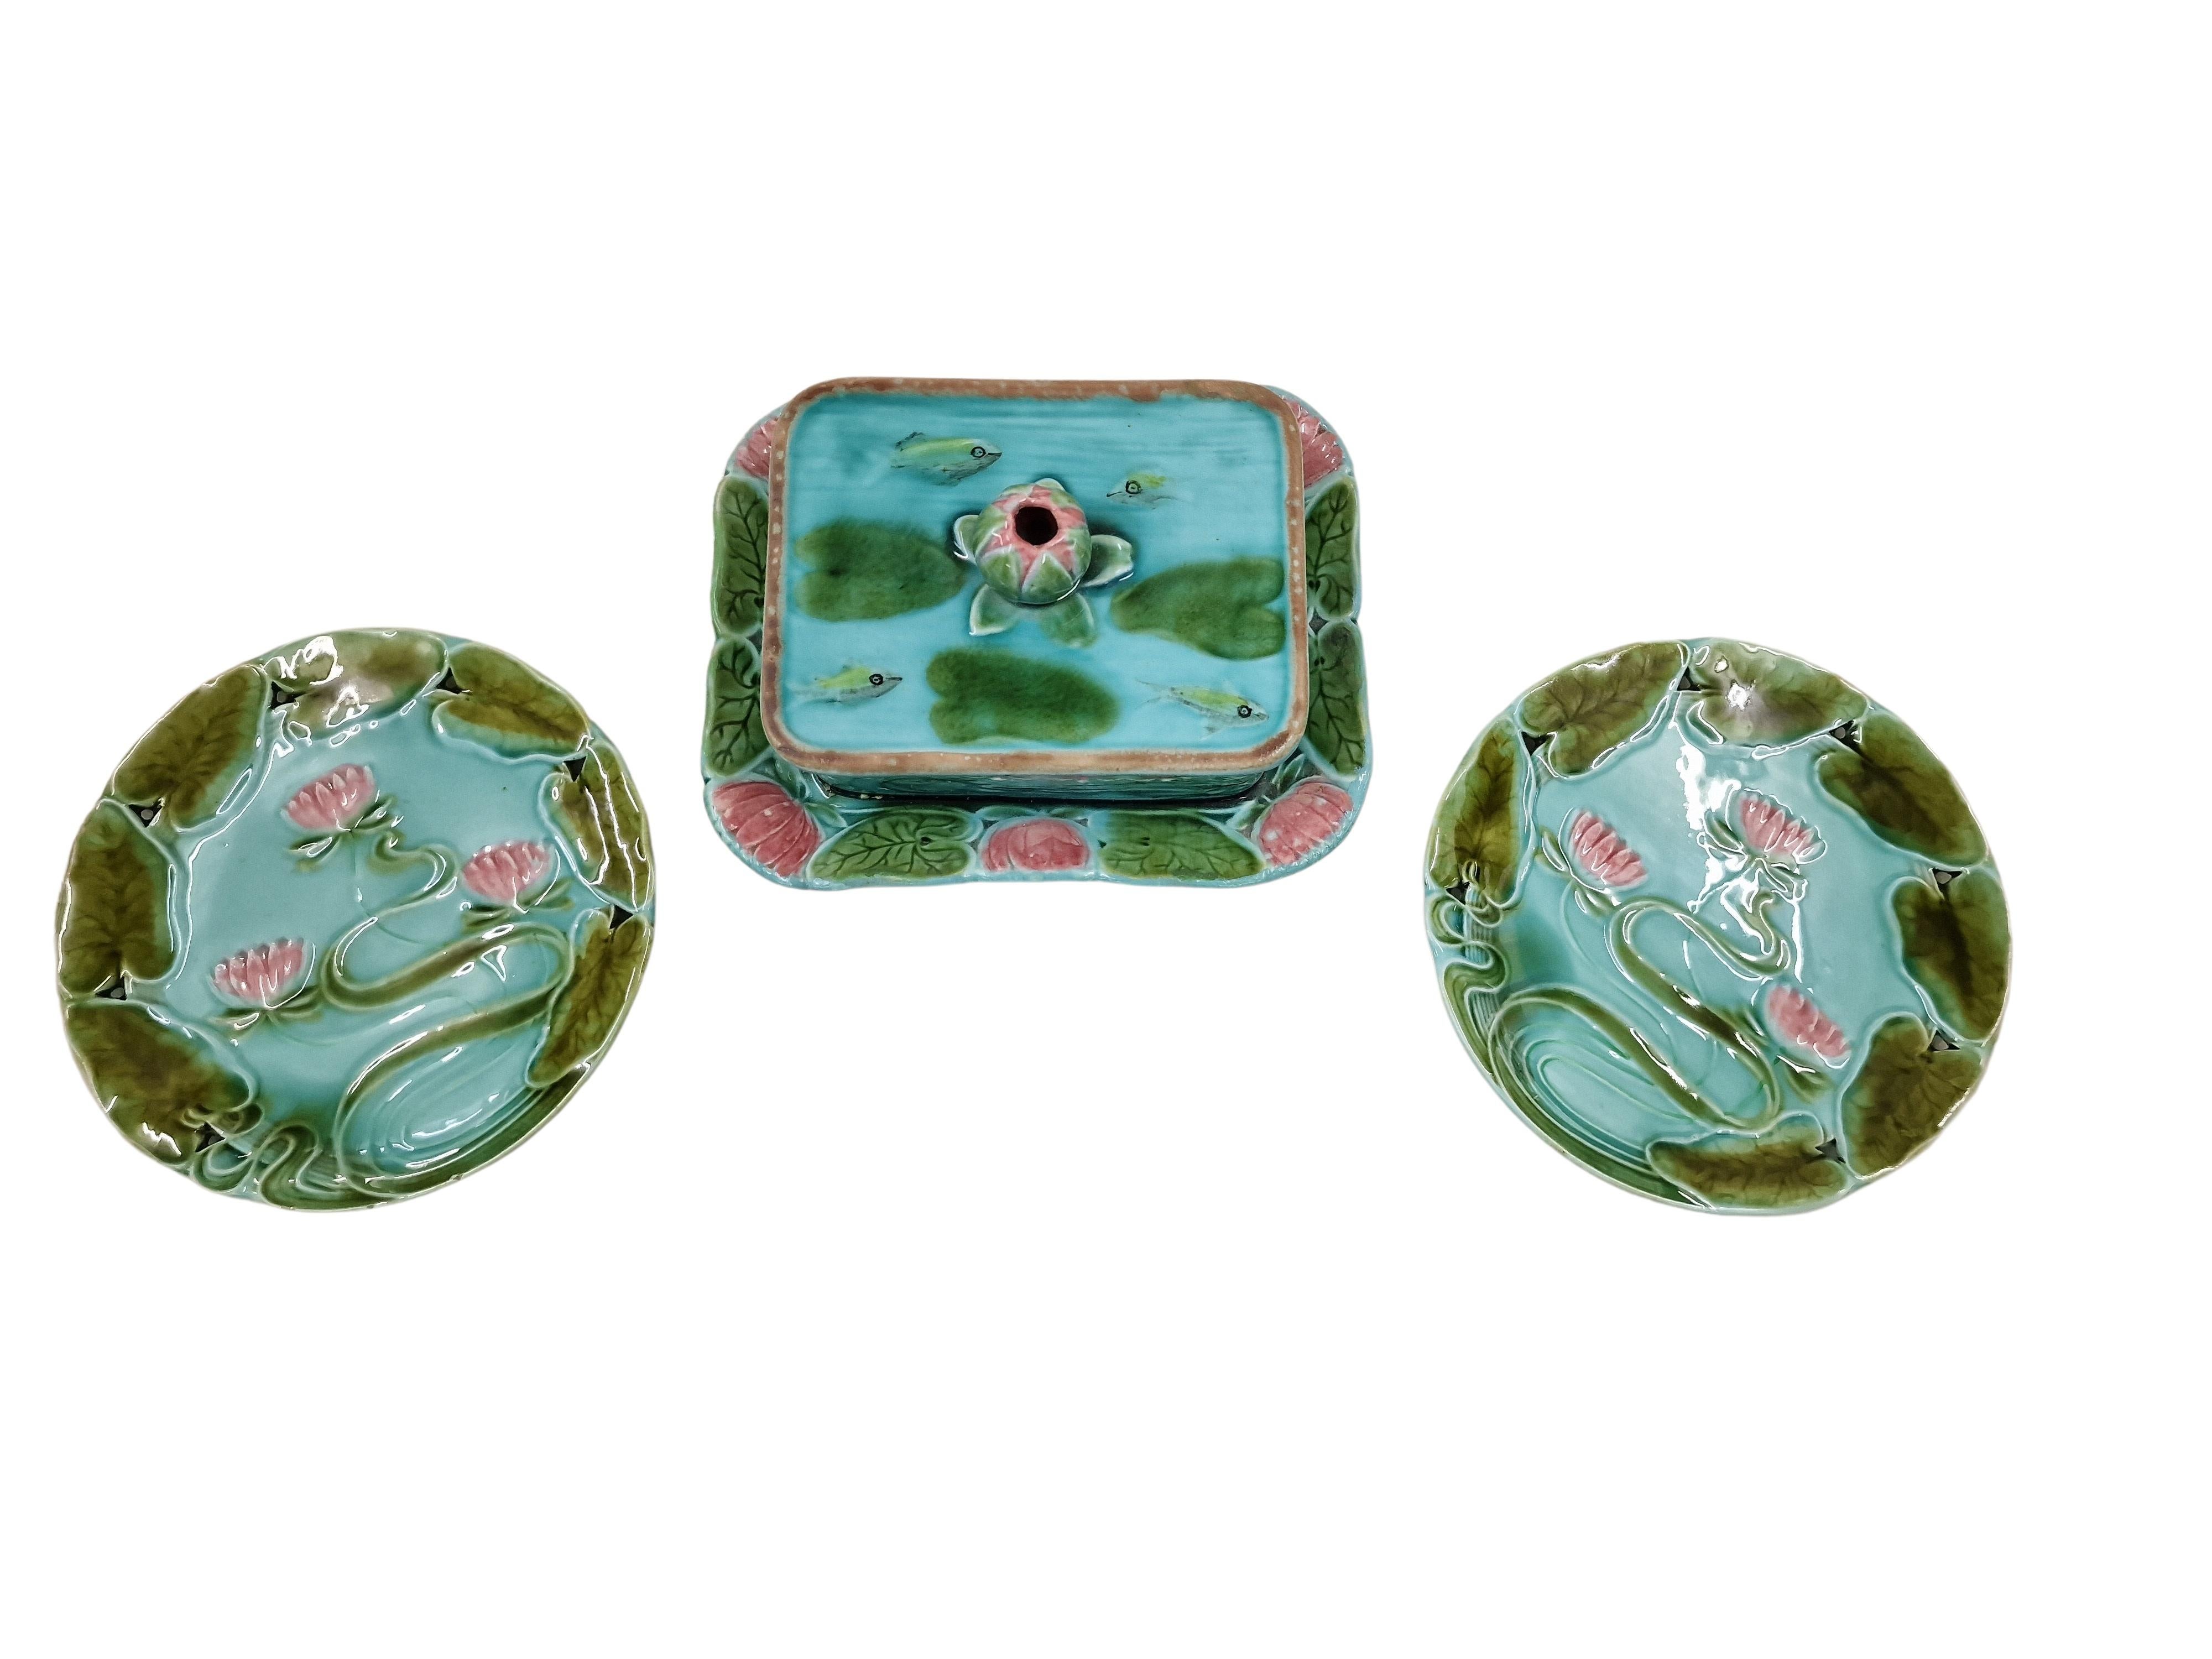 Wonderful two-person set, consisting of a butter dish and two plates. The set is made of ceramic, glazed and hand painted, of the Art Nouveau period, made around 1910, in Austria. 

The set is exceptionally beautifully designed, everything has a